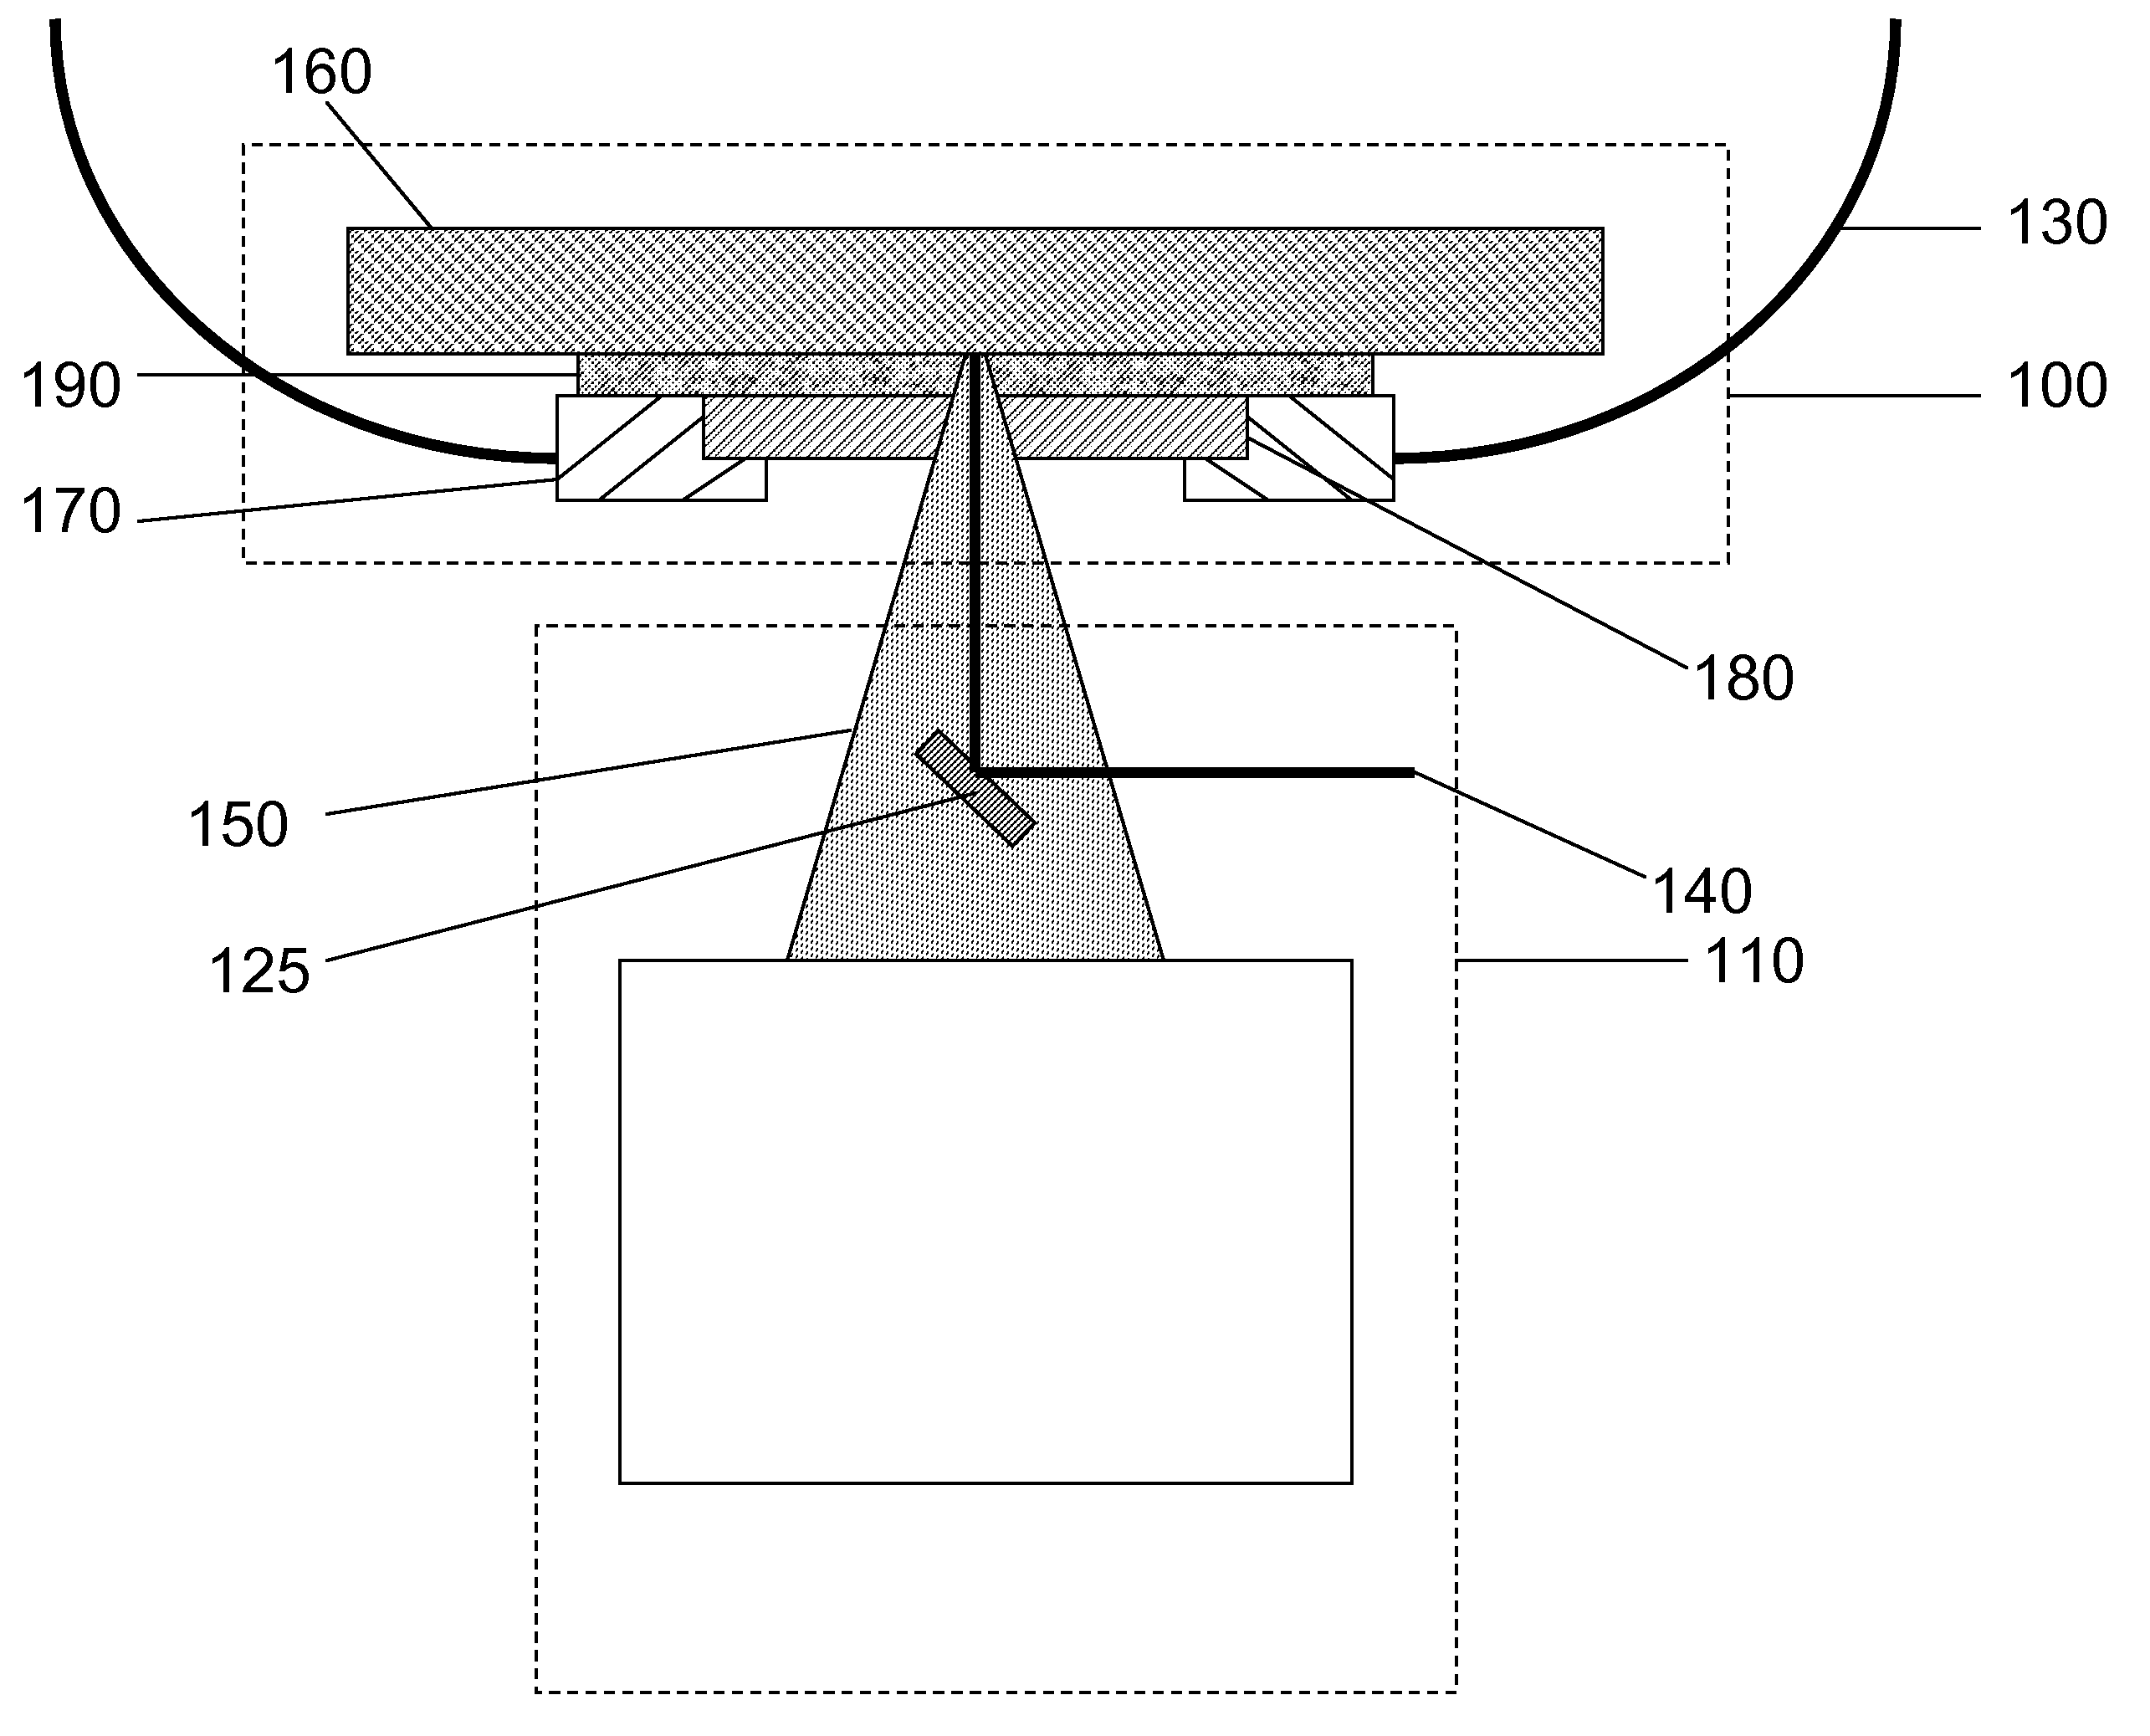 Apparatus for stabilizing mechanical, thermal, and optical properties and for reducing the fluorescence of biological samples for optical evaluation